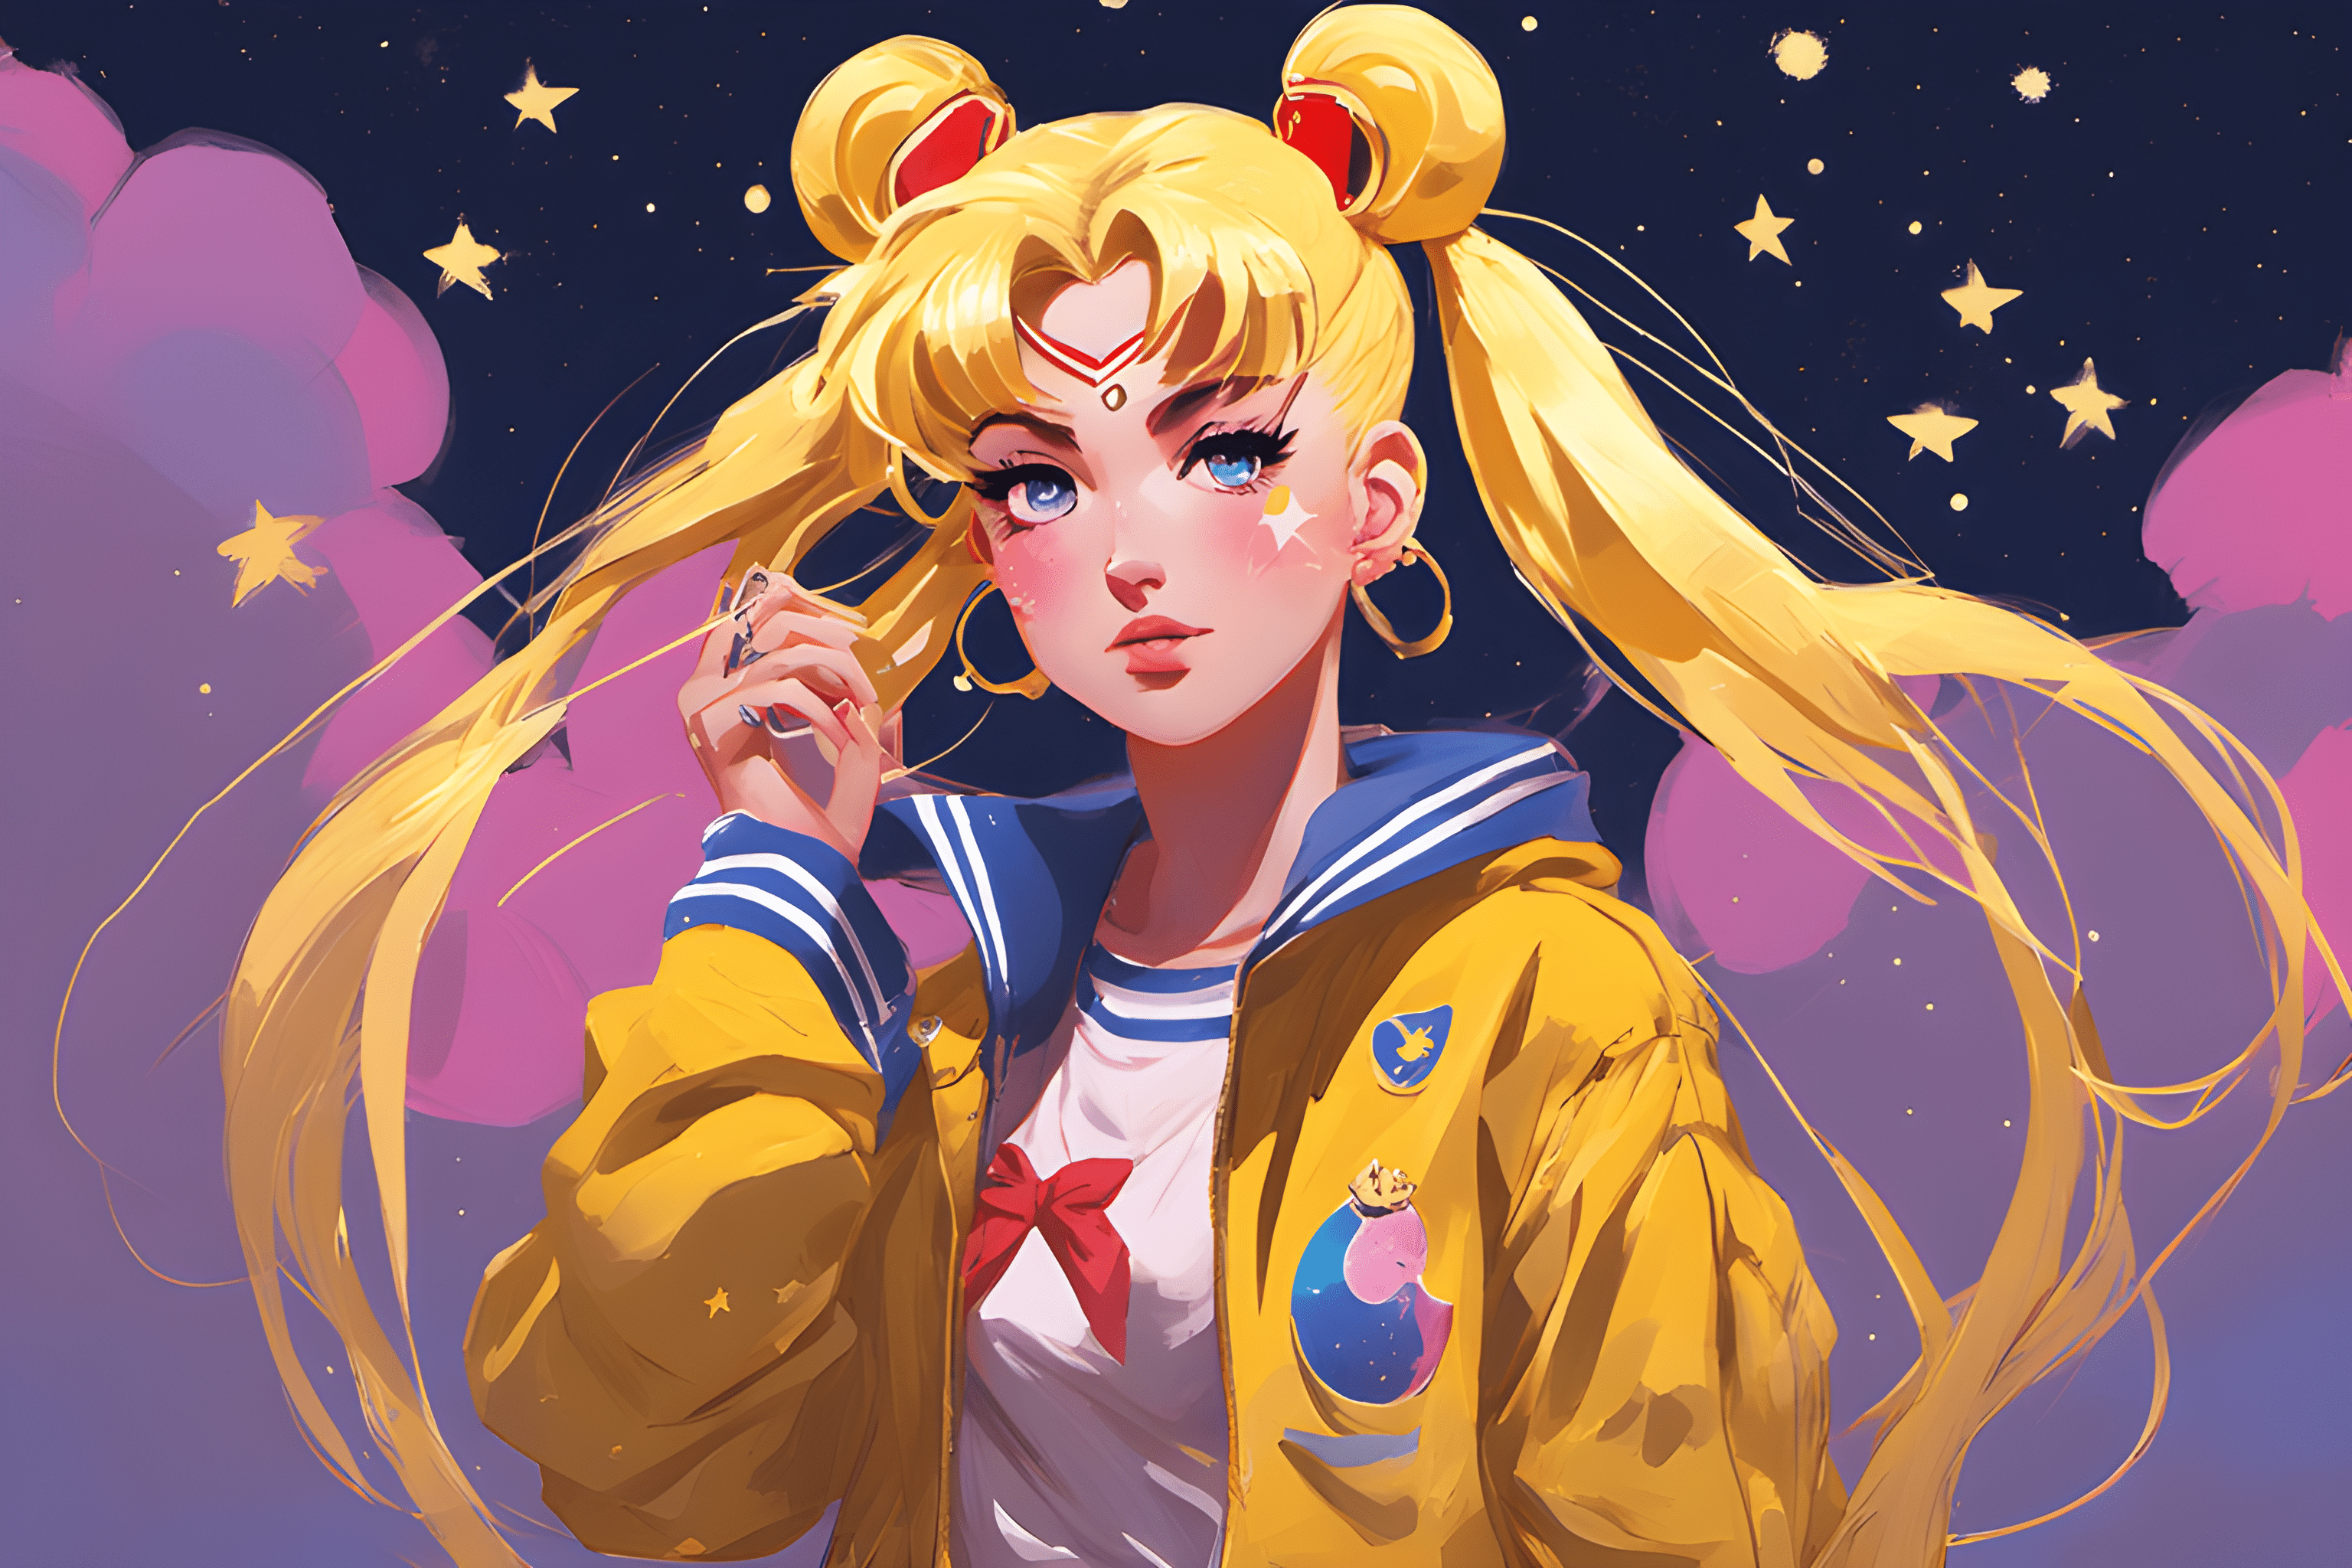 A blonde girl with pigtails, dressed in a yellow jacket, looks pensively into the distance. - Sailor Moon